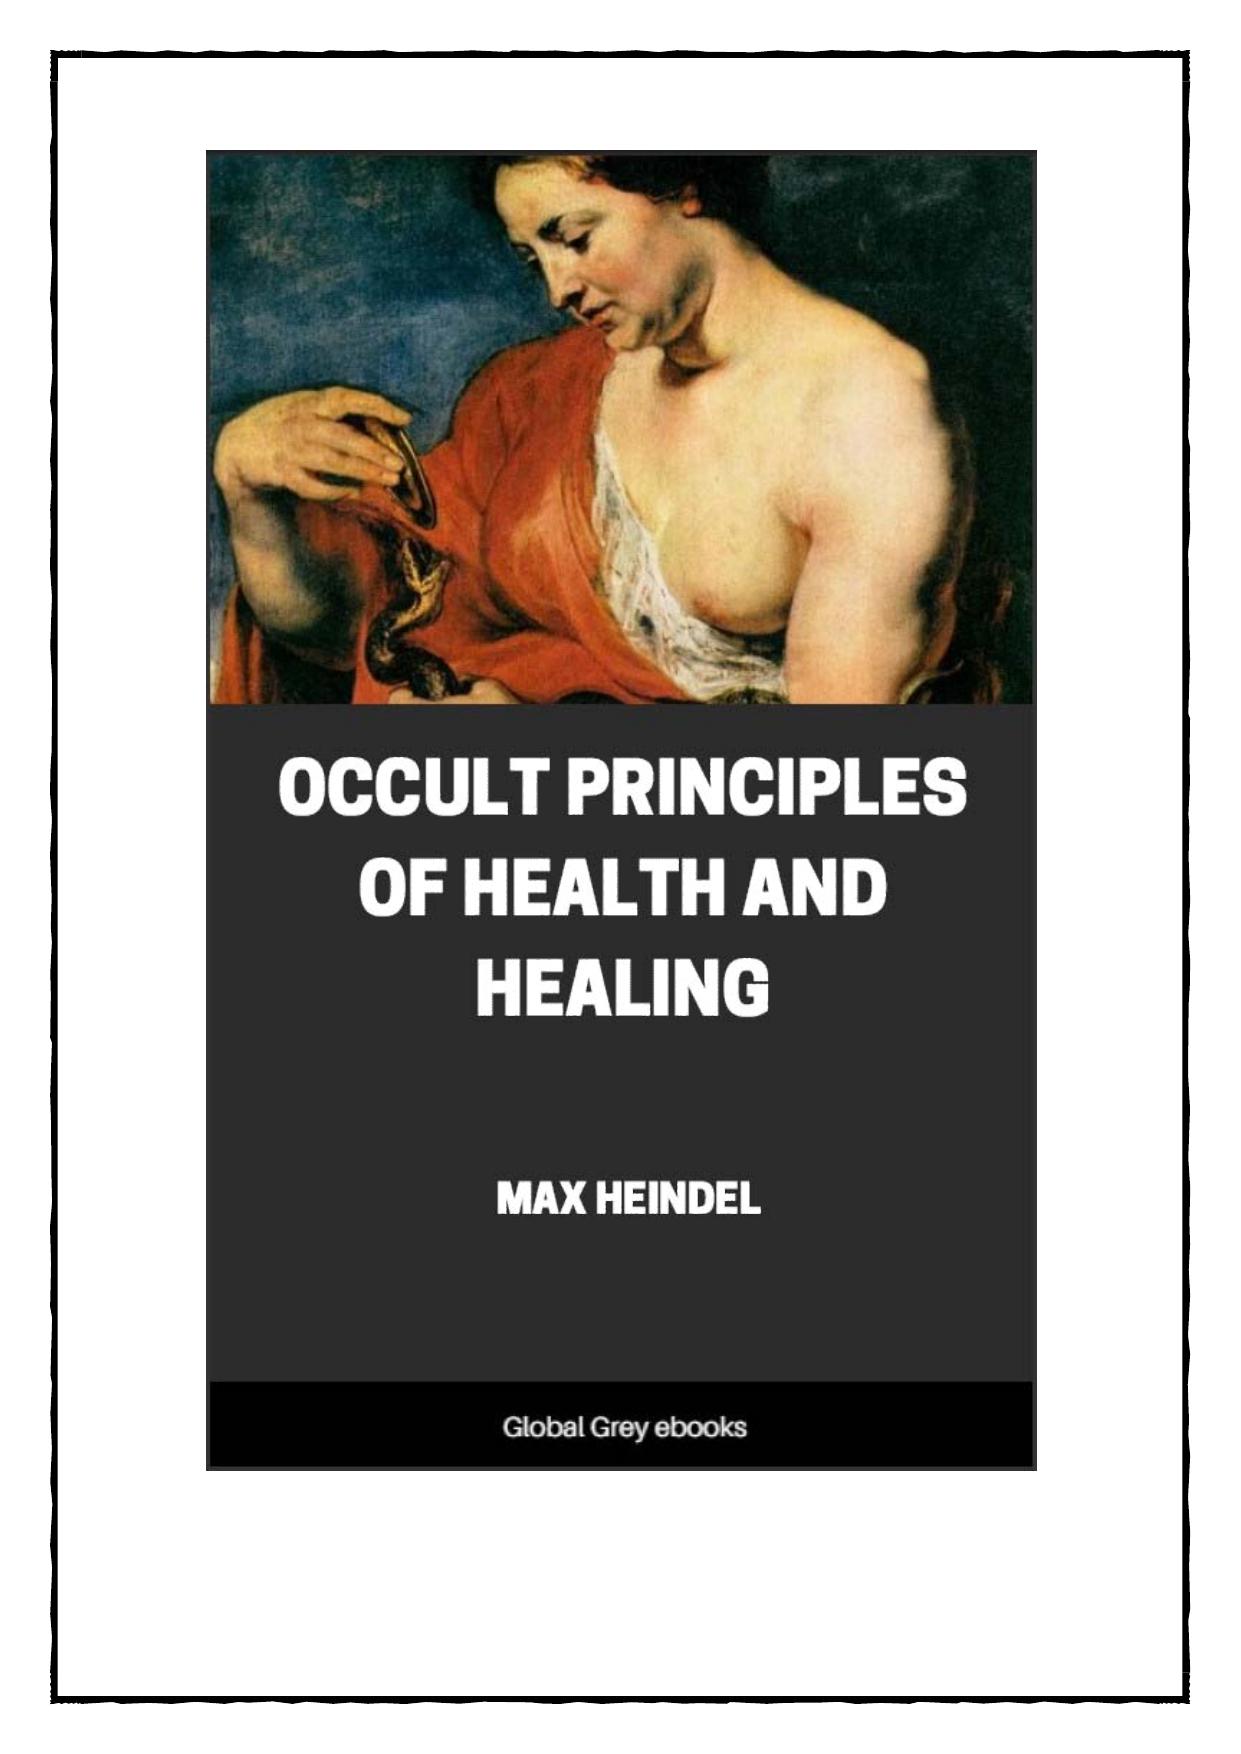 Occult Principles Of Health And Healing by Max Heindel